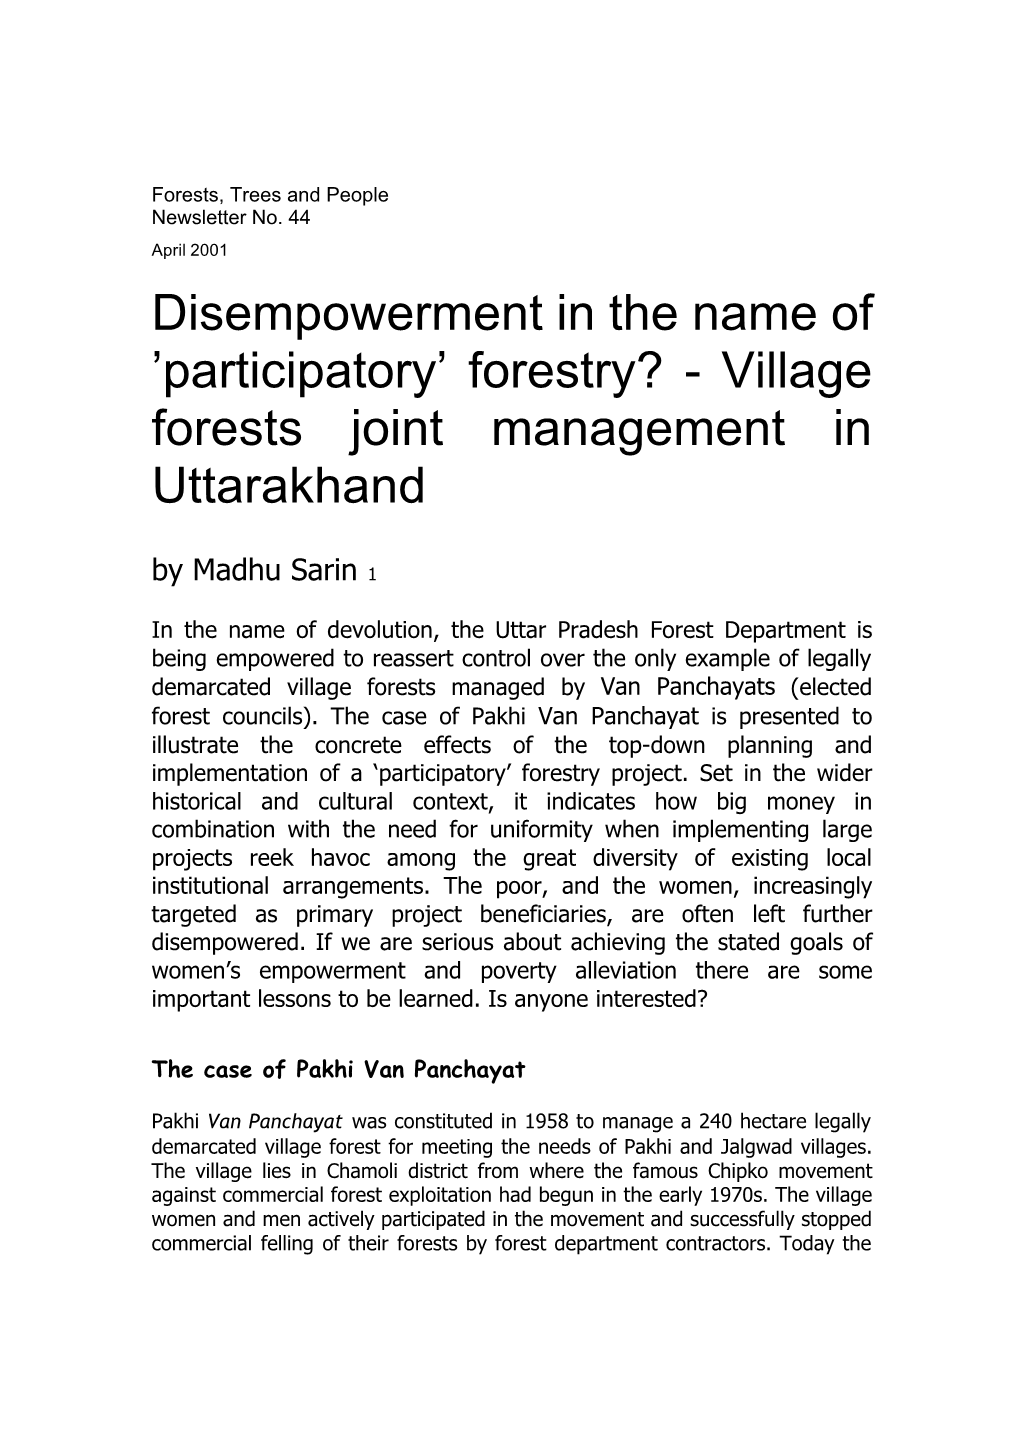 Village Forests Joint Management in Uttarakhand by Madhu Sarin 1